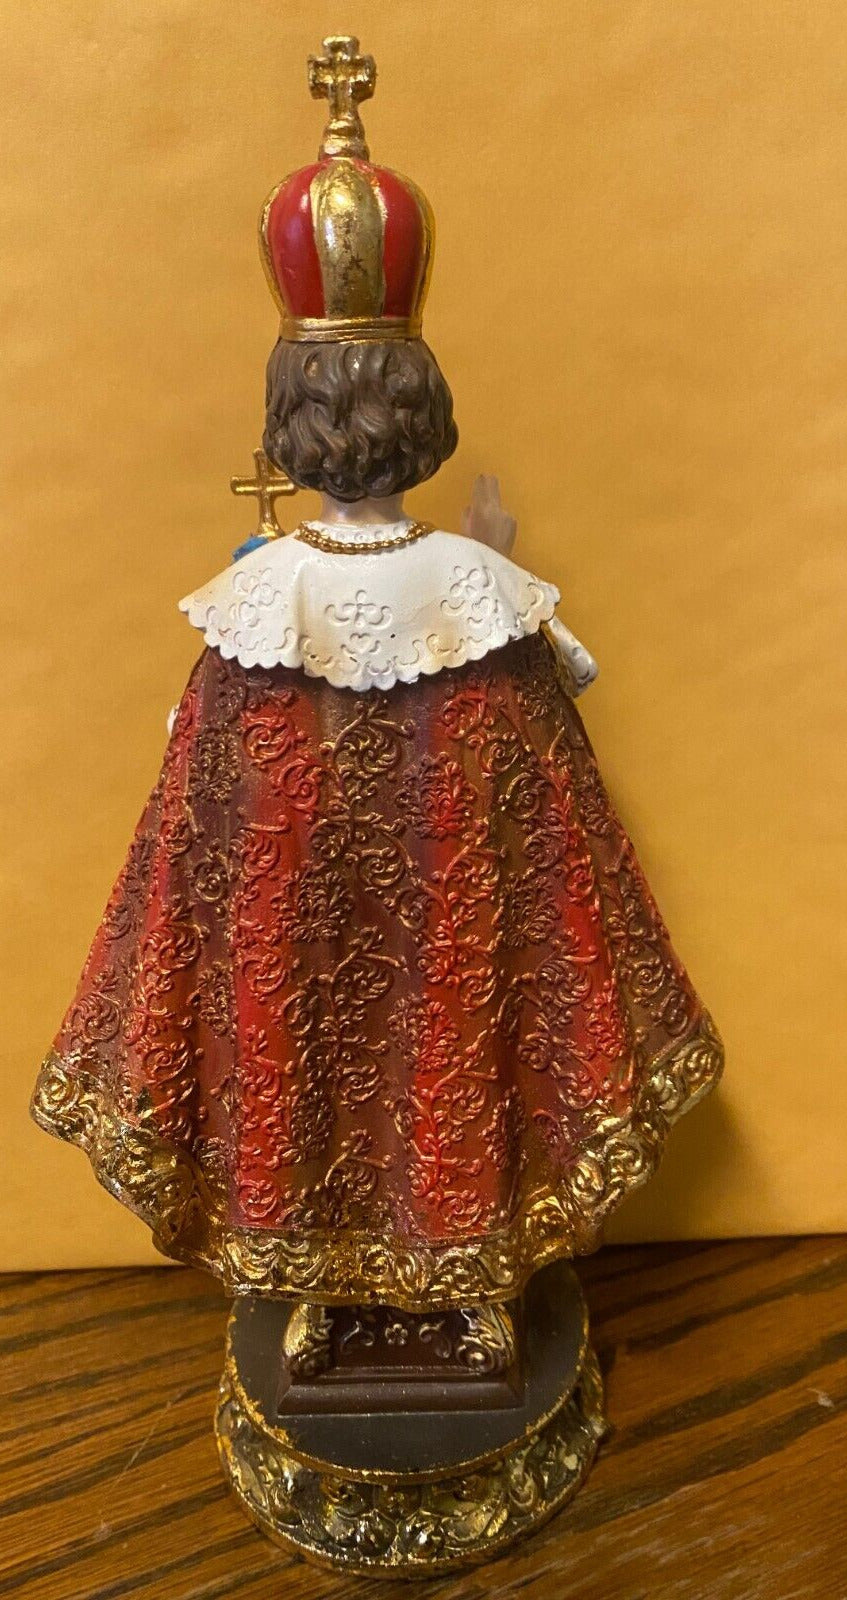 Infant Jesus of Prague 8.75" Statue, New - Bob and Penny Lord